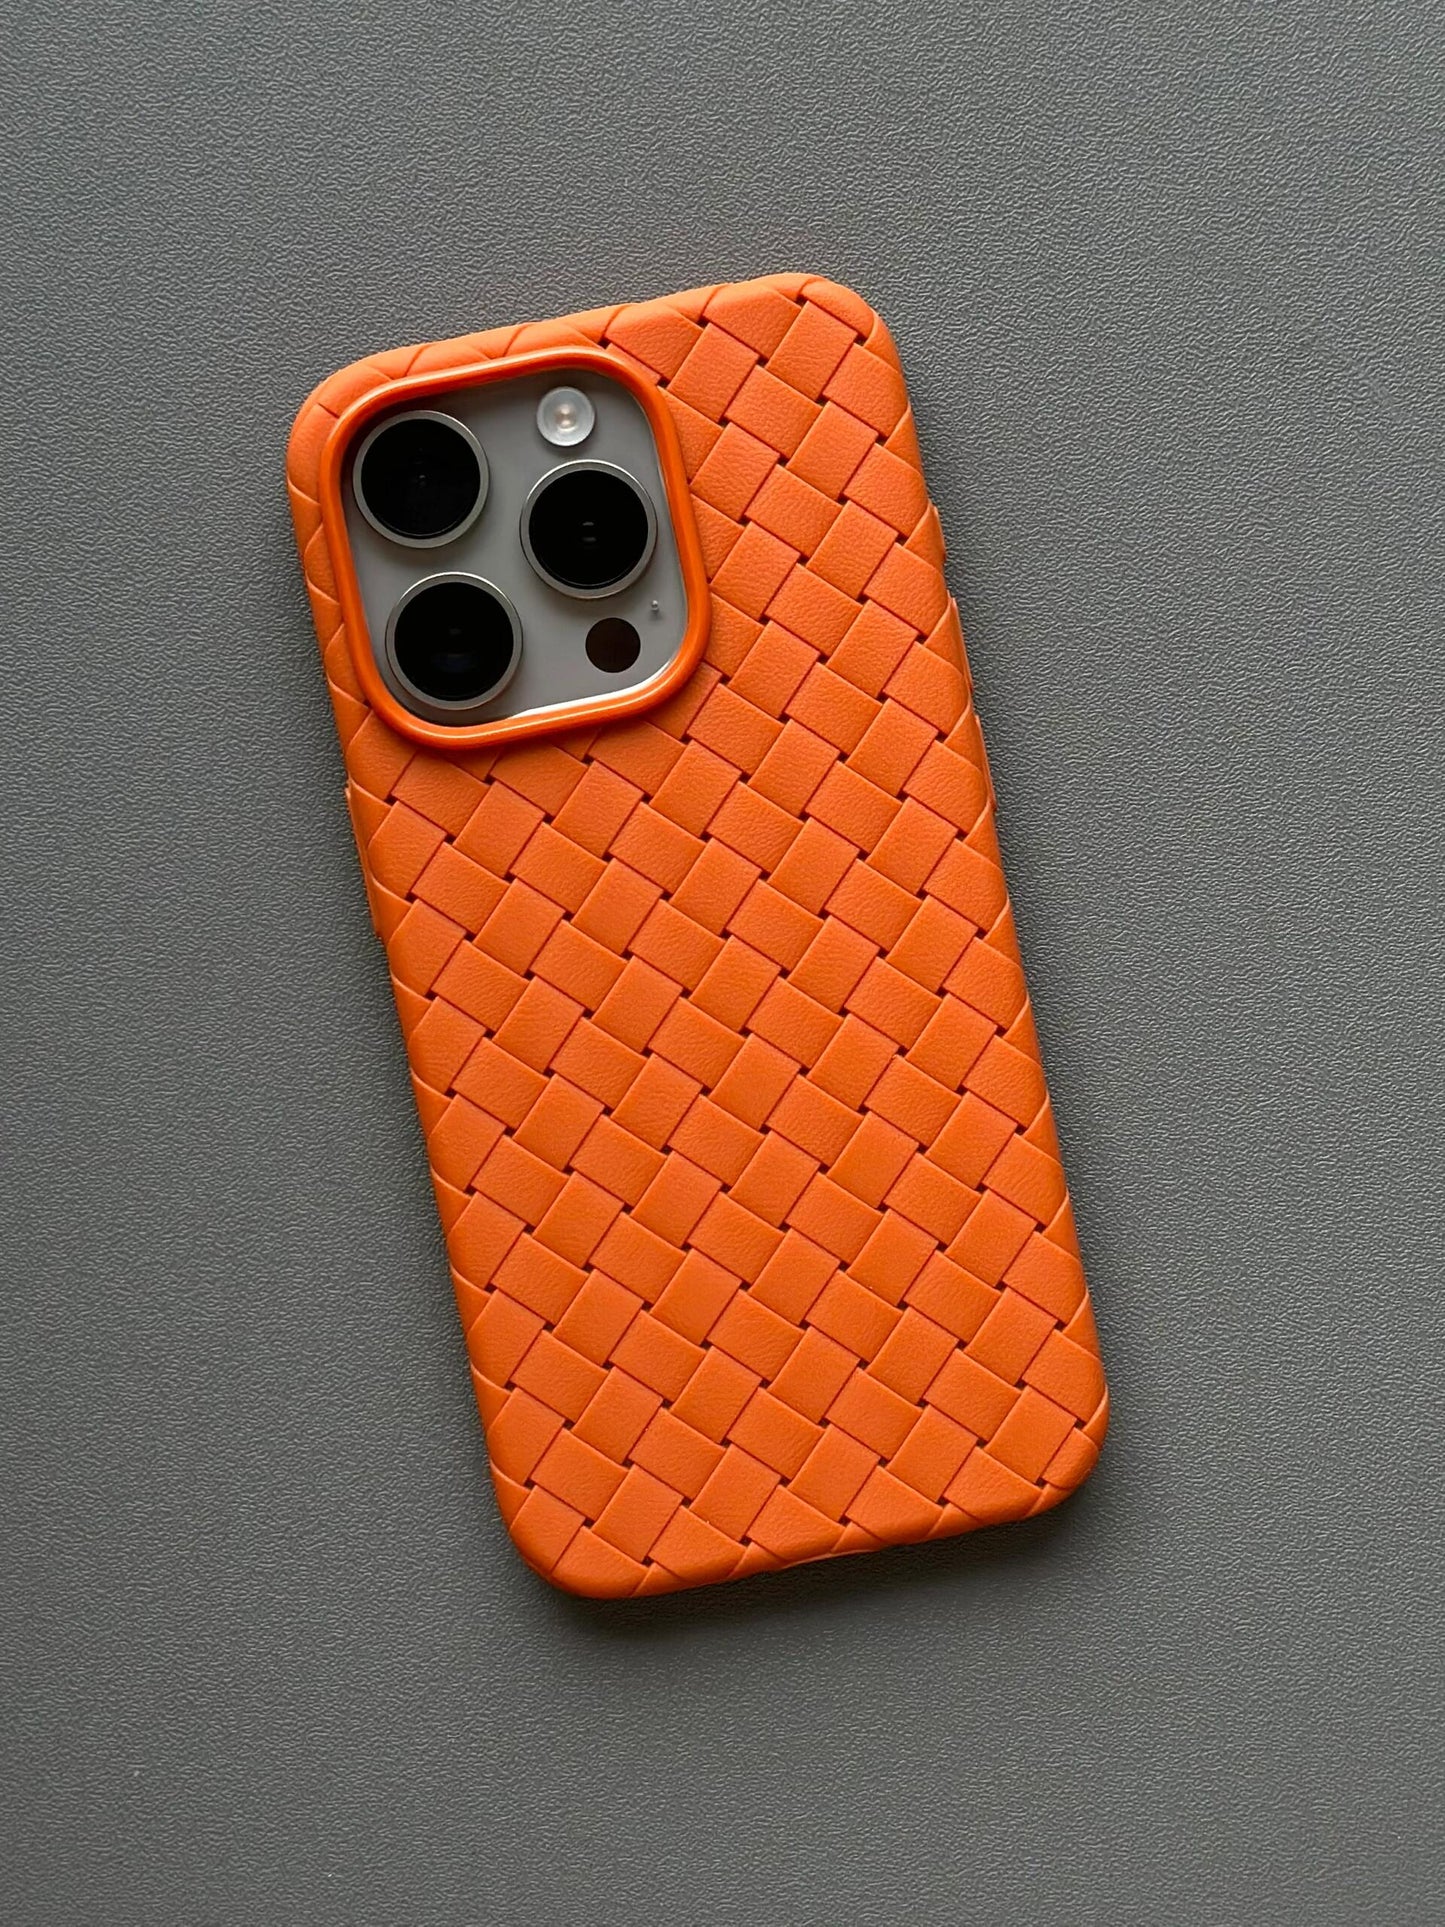 Woven iPhone Full Body Protective Case Aesthetic 3D Woven Grid Plaid Laid Pattern Phone Case Shockproof Phone Case Orange